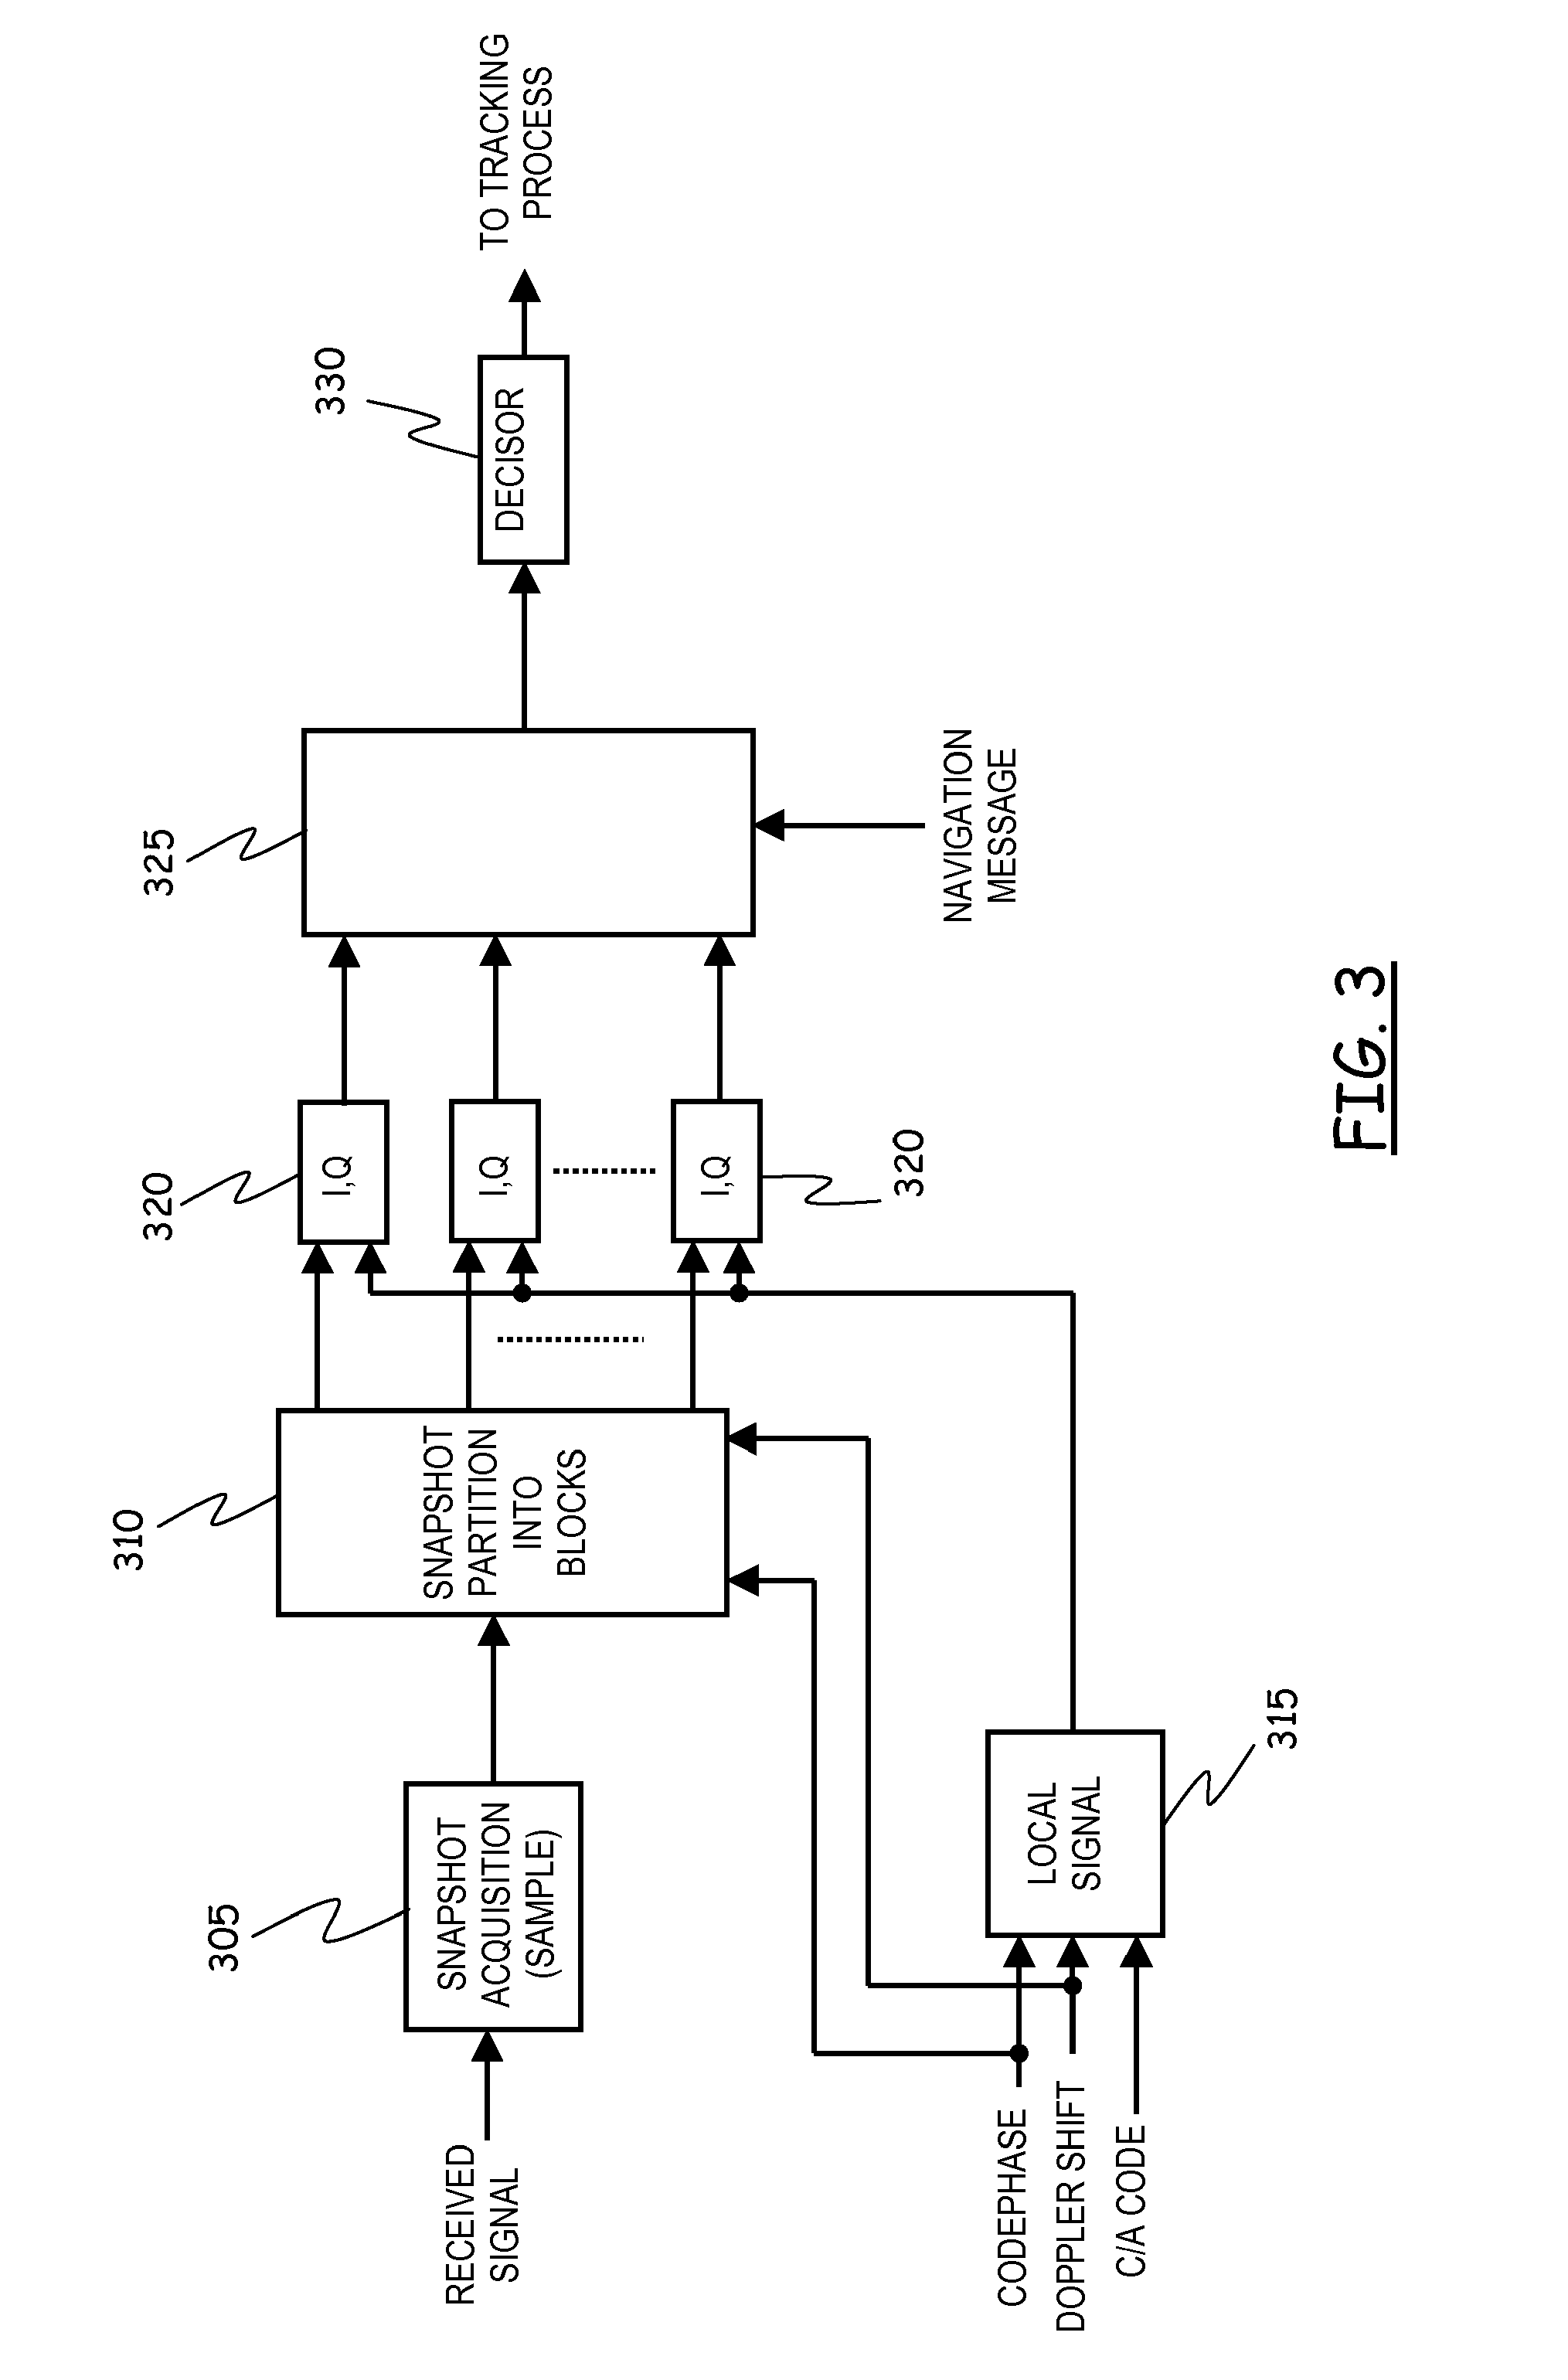 Method for the acquisition of signals of a global navigation satellite system